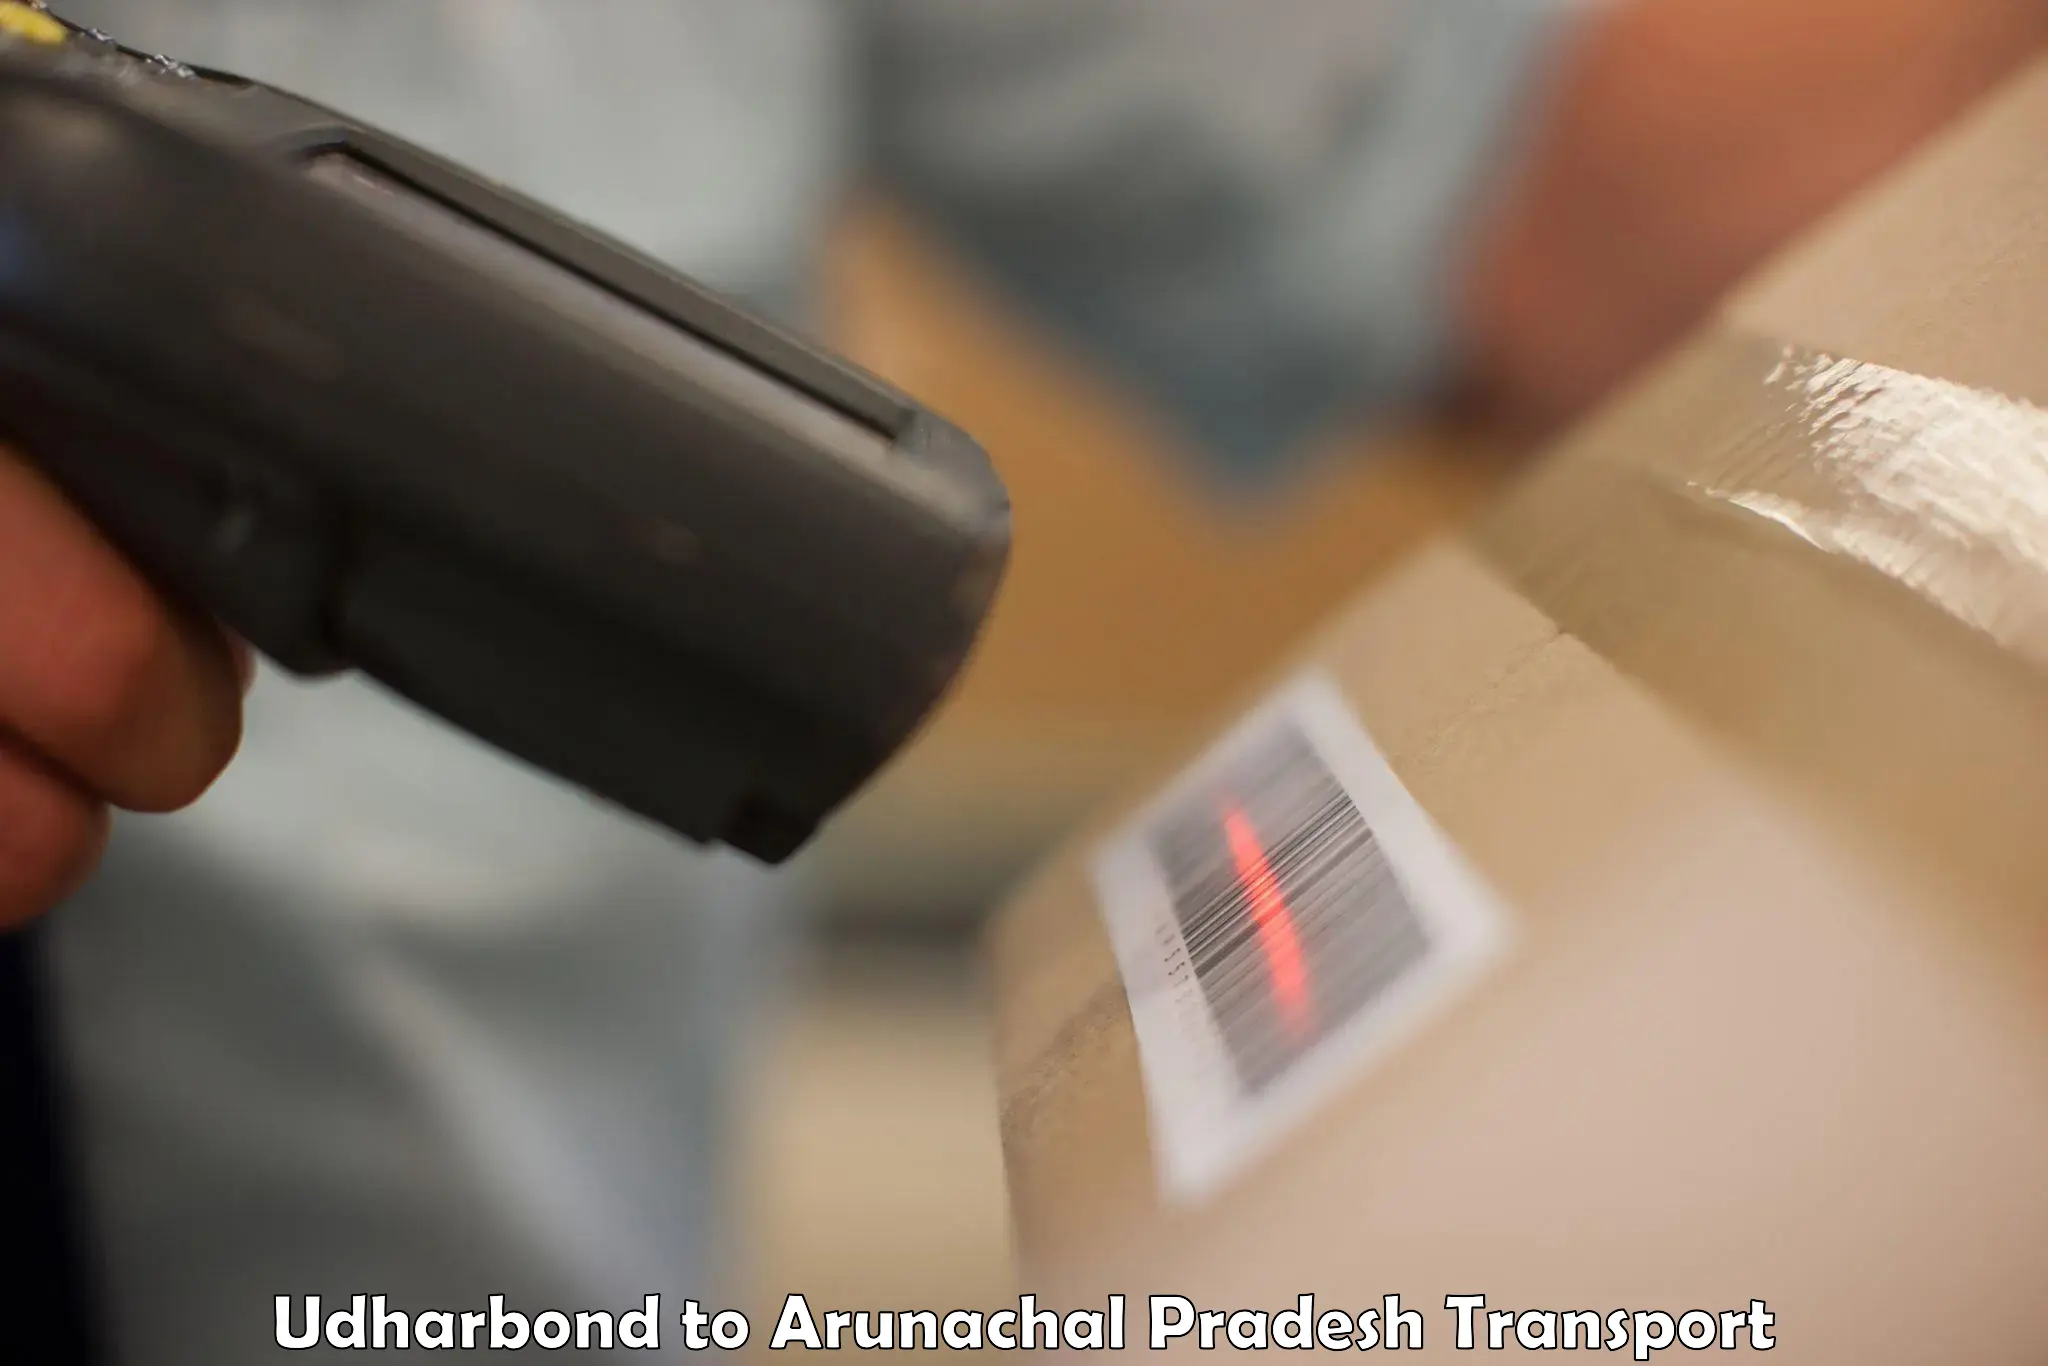 Truck transport companies in India Udharbond to Likabali